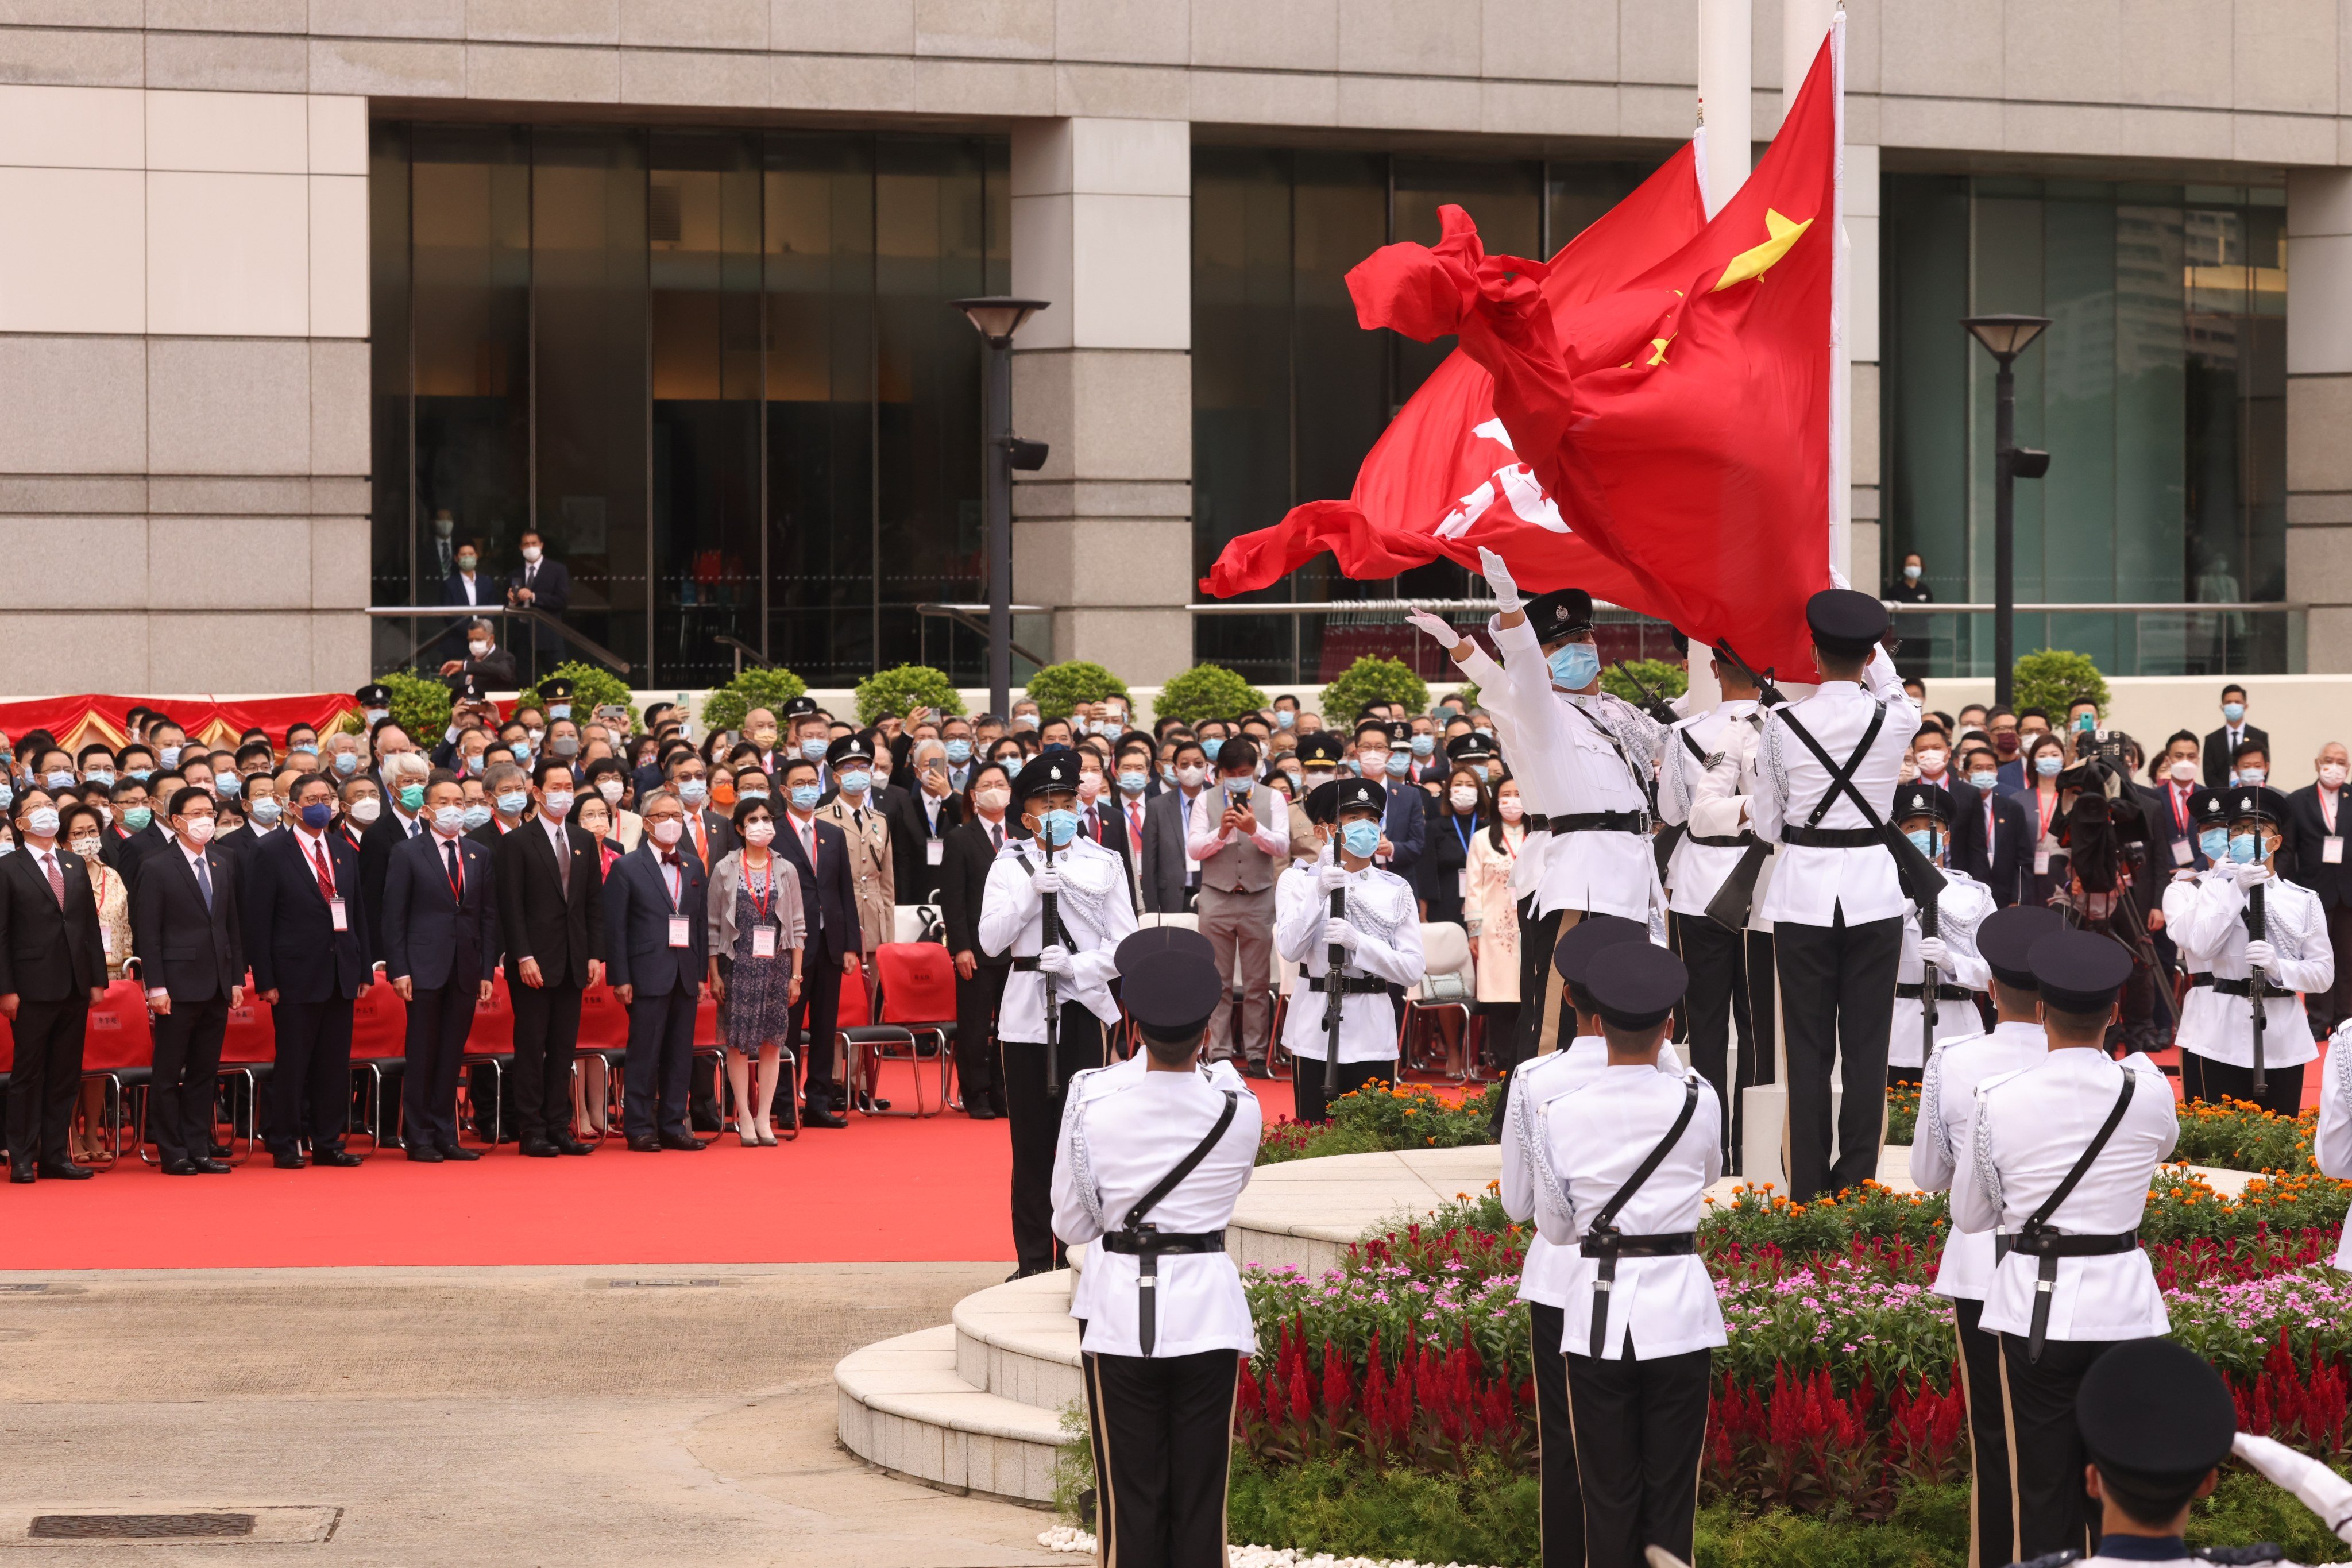 A flag-raising ceremony at Golden Bauhinia Square on July 1, 2021. Photo: K. Y. Cheng